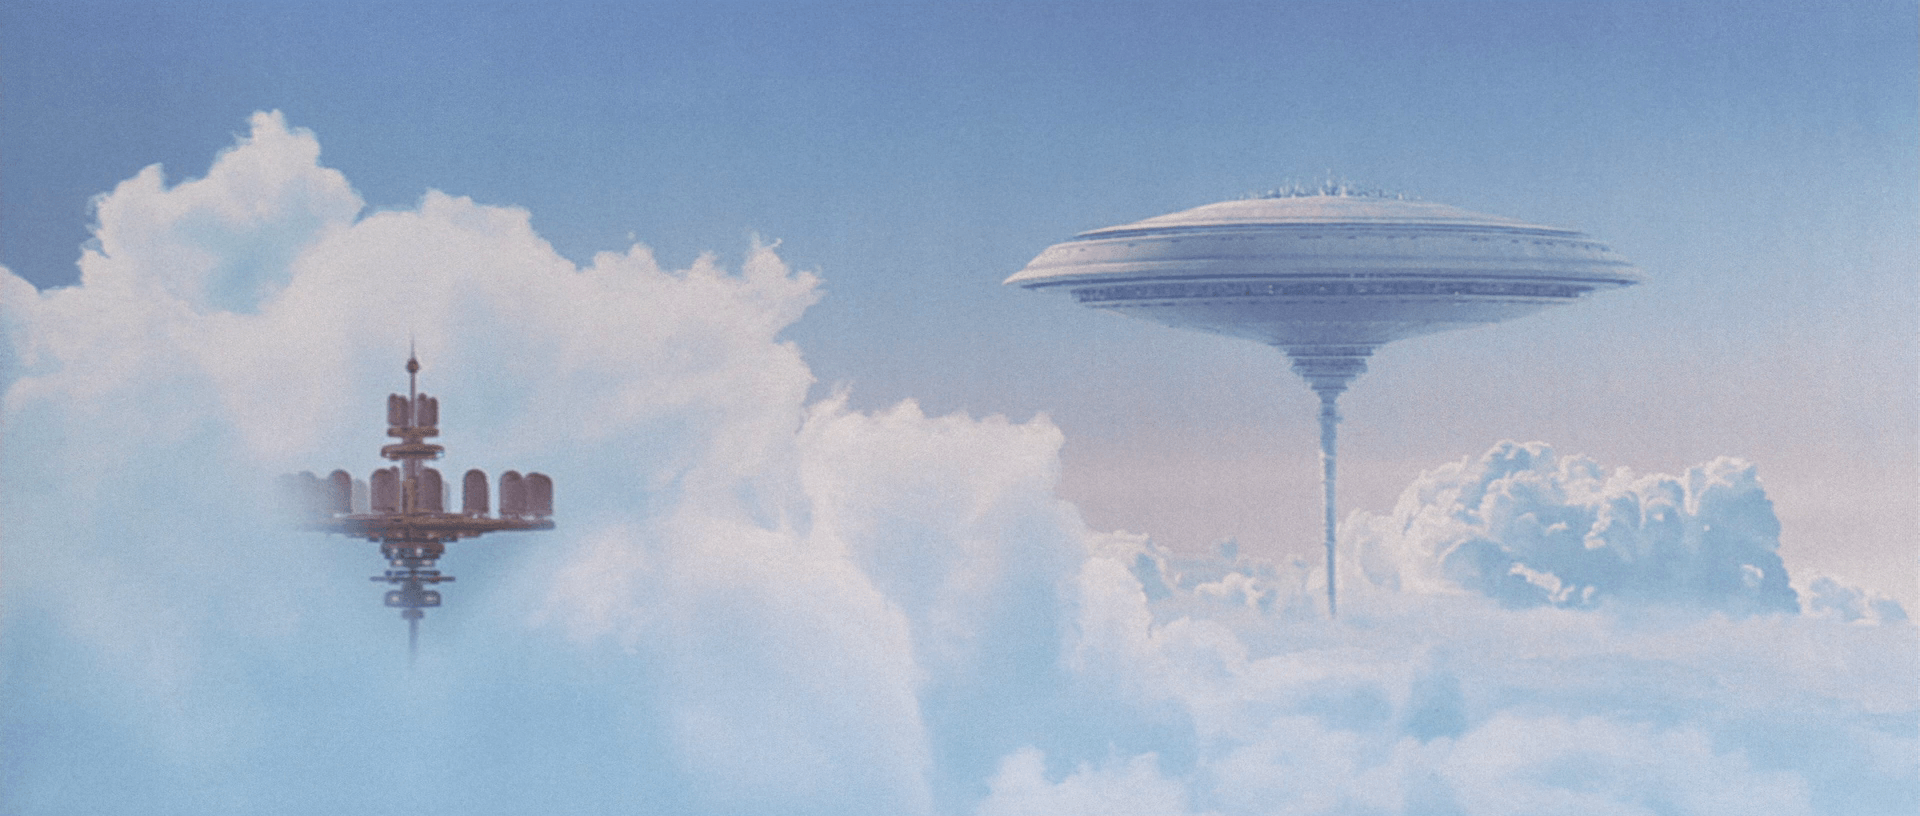 Stay in a flying city on Venus